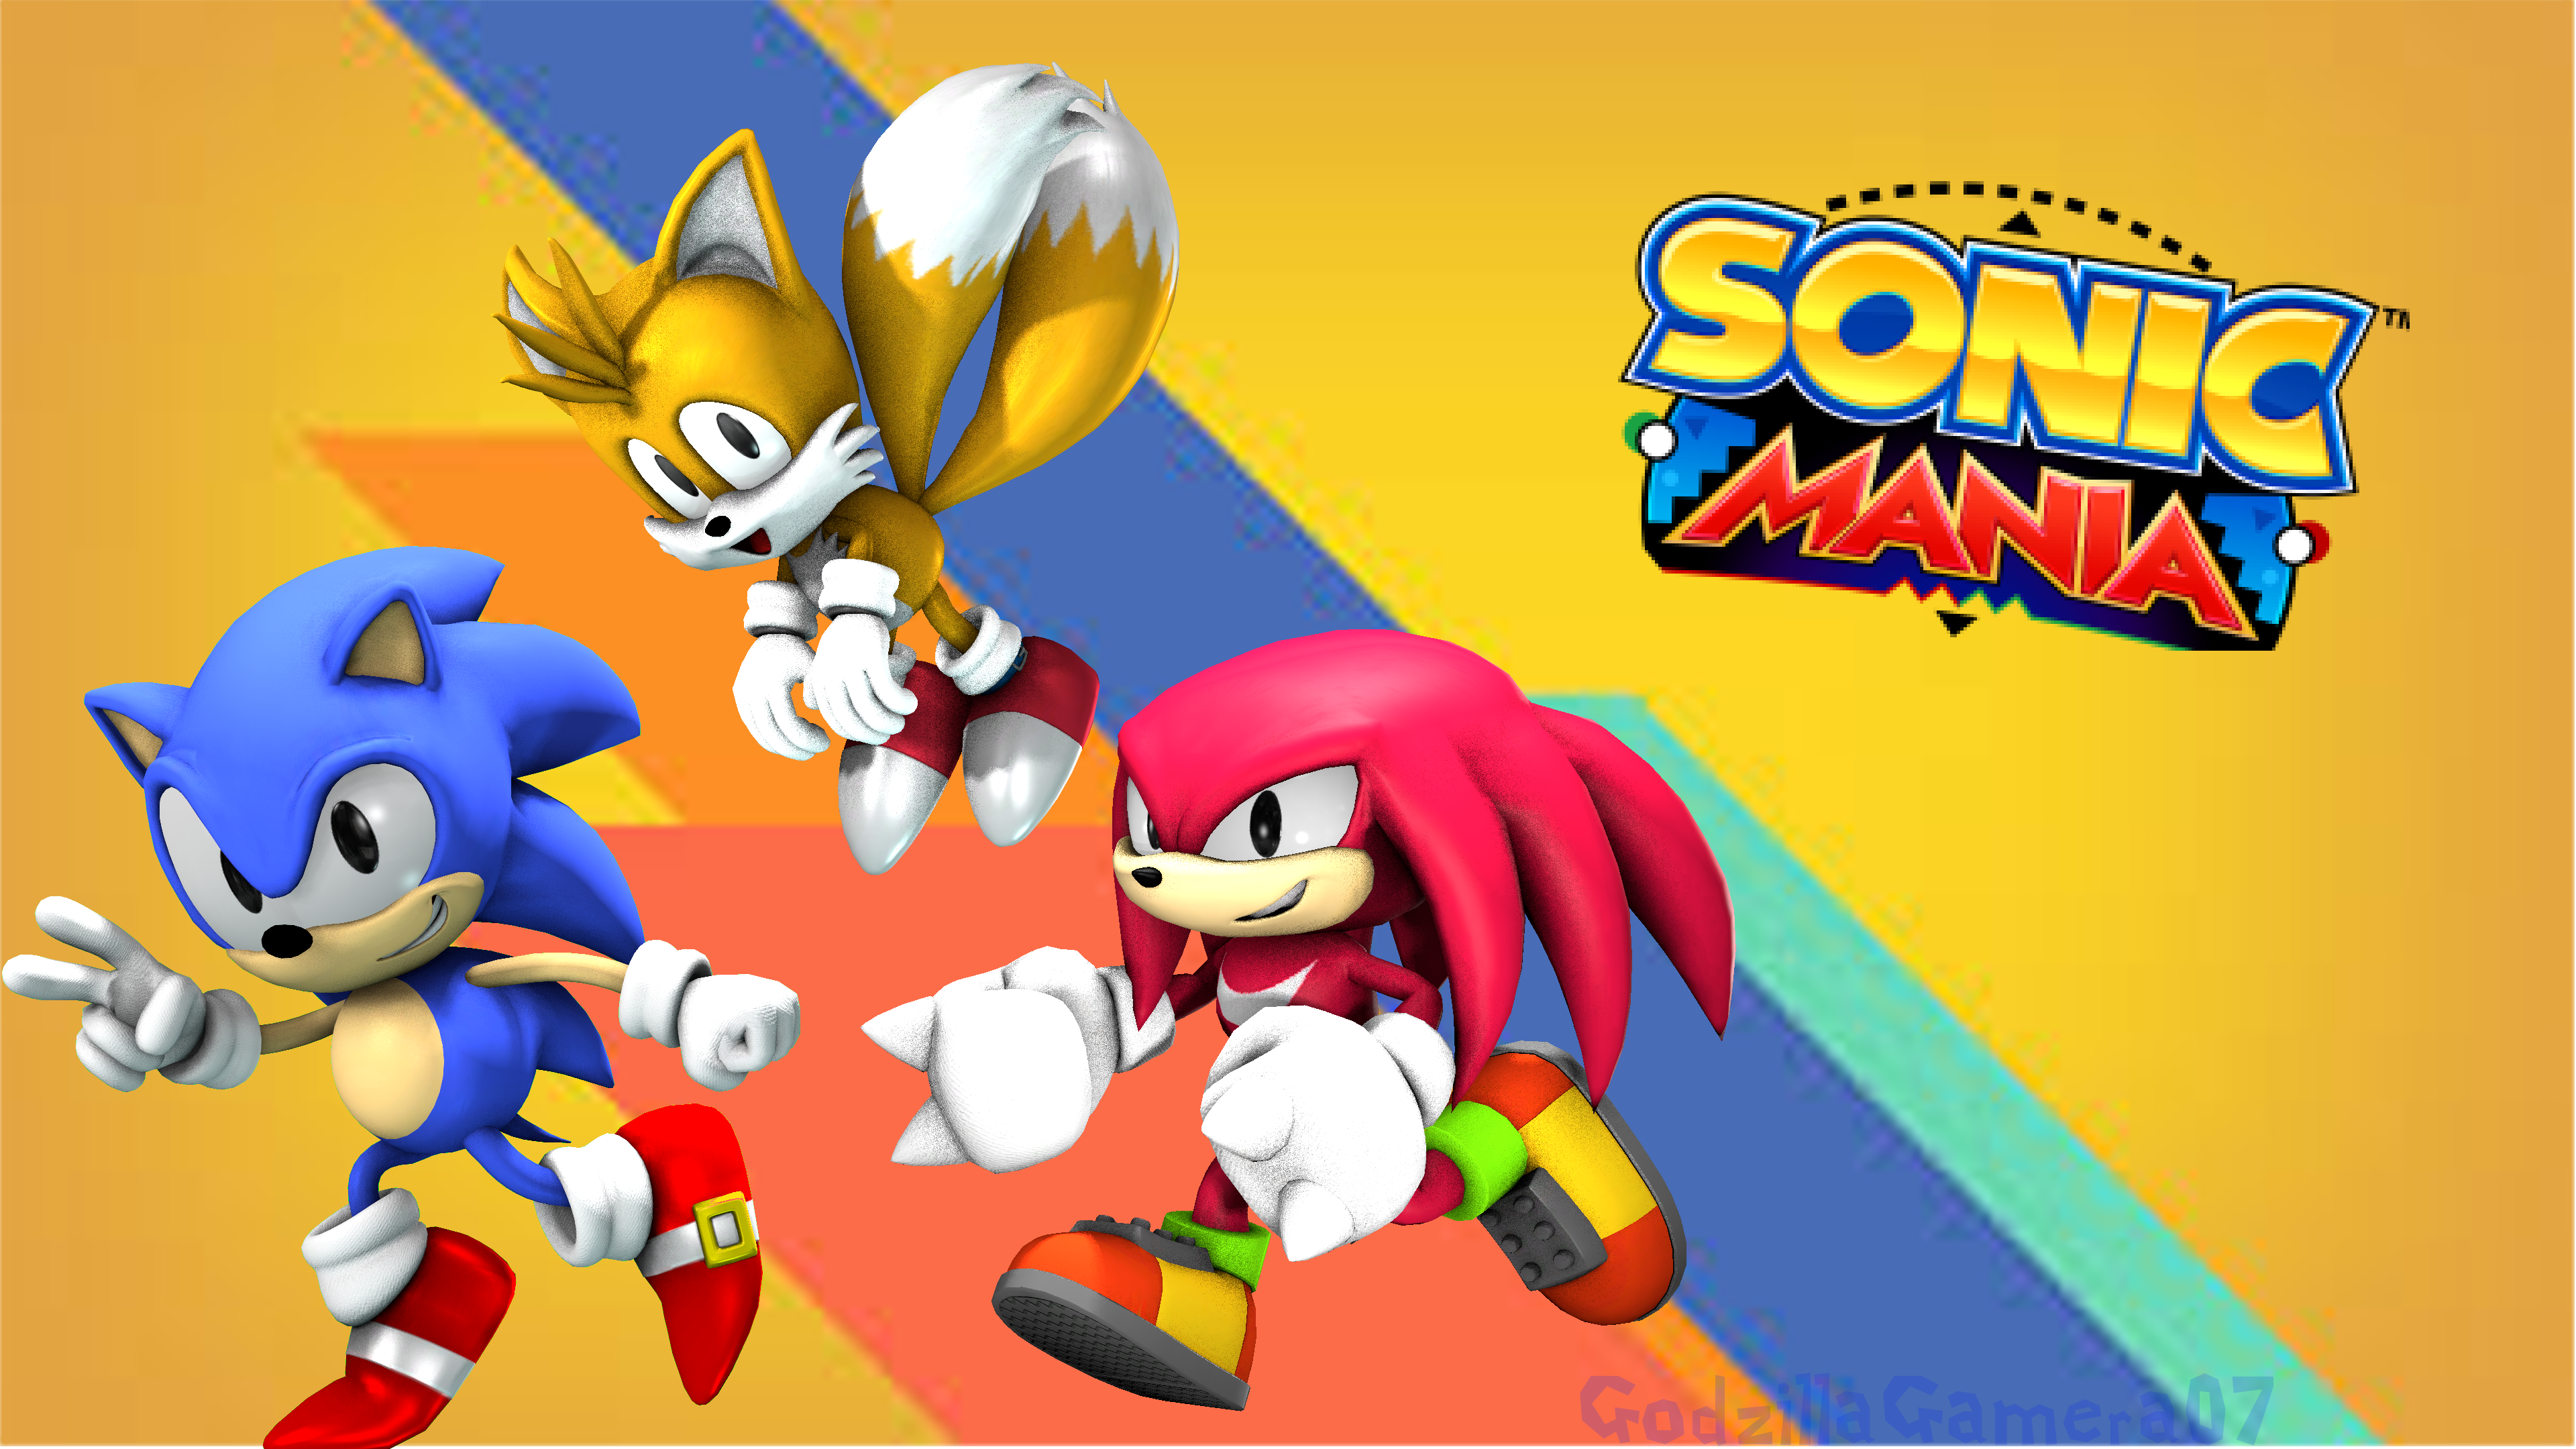 Sonic Animation -SUPER TAILS IN SONIC MANIA!?- SFM Animation 4K